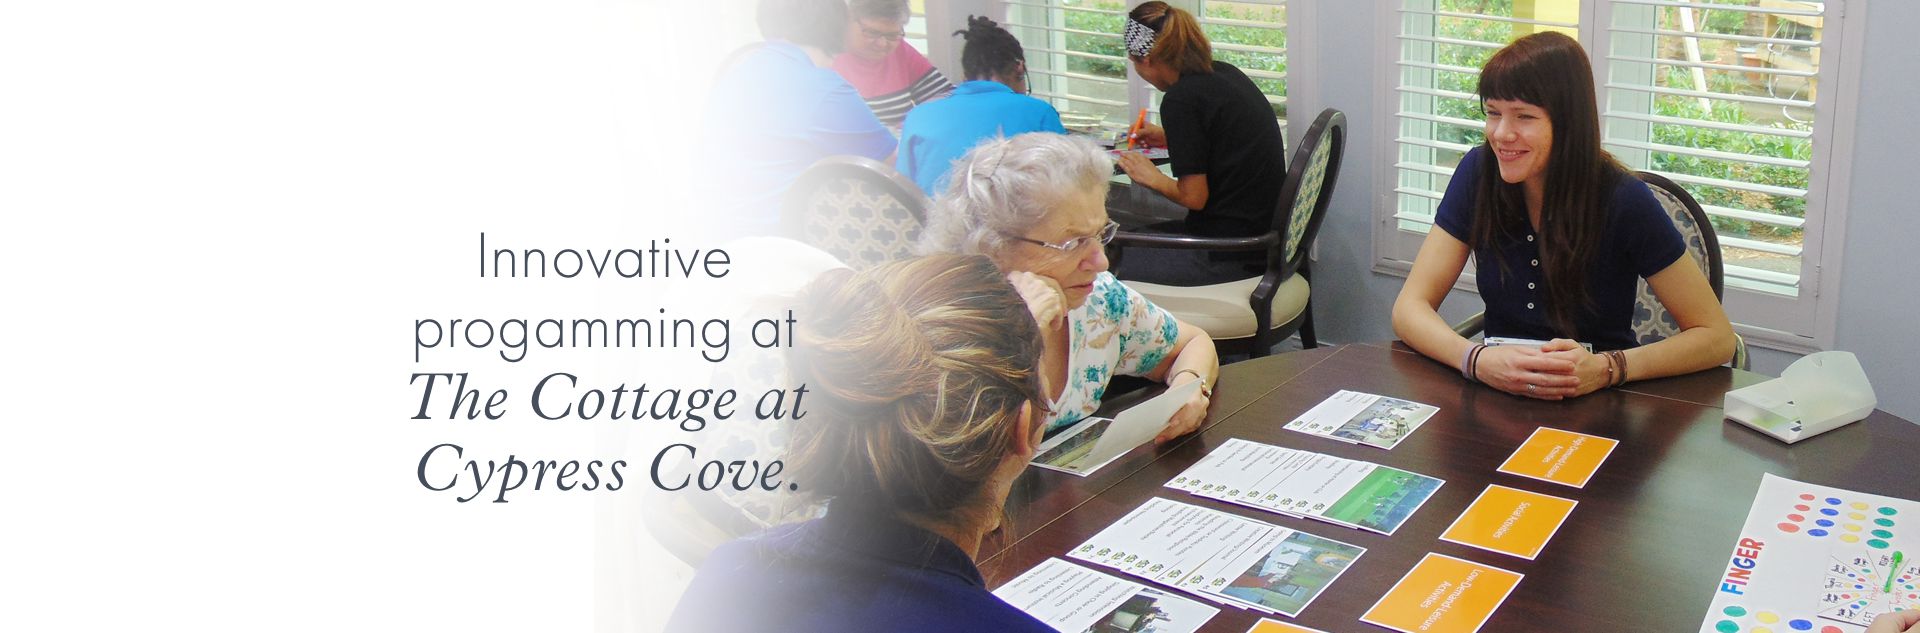 Innovative memory care programming at The Cottage at Cypress Cove.